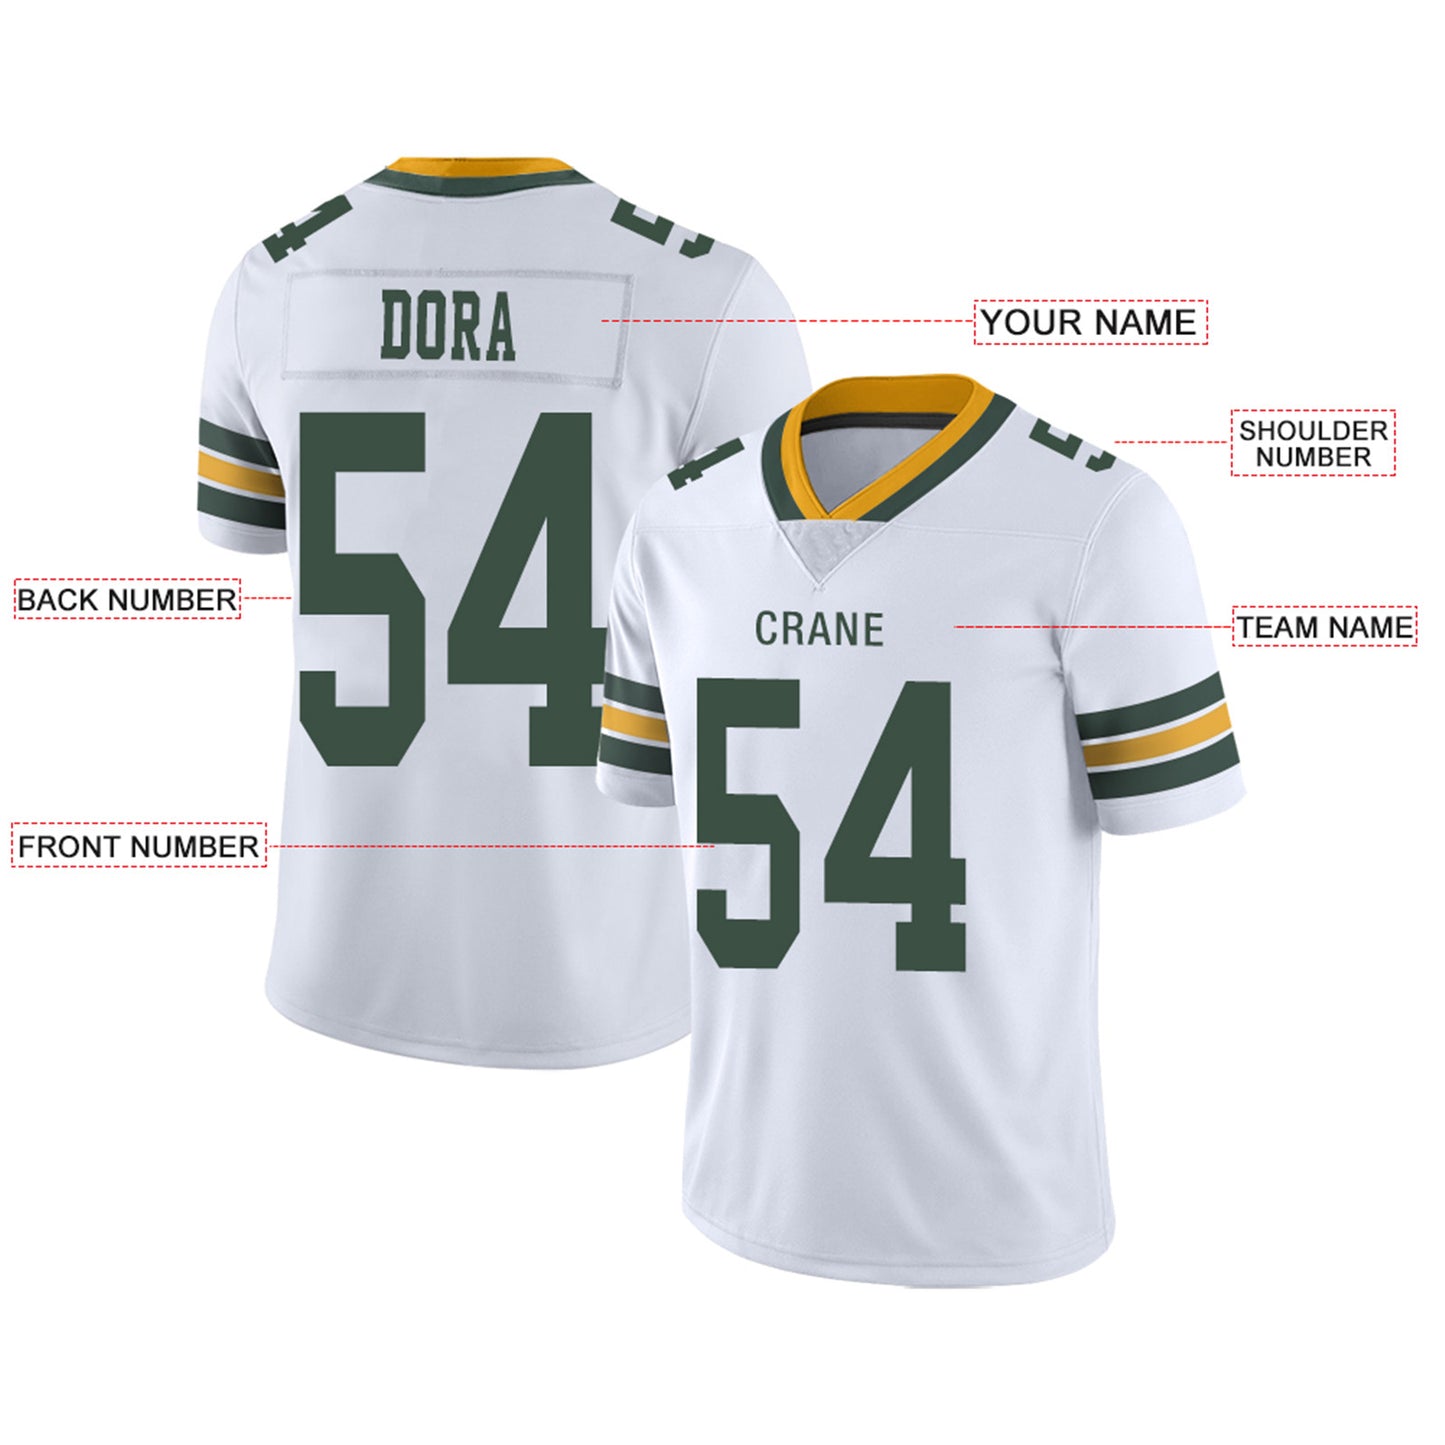 Custom GB.Packers Football Jerseys Team Player or Personalized Design Your Own Name for Men's Women's Youth Jerseys Green